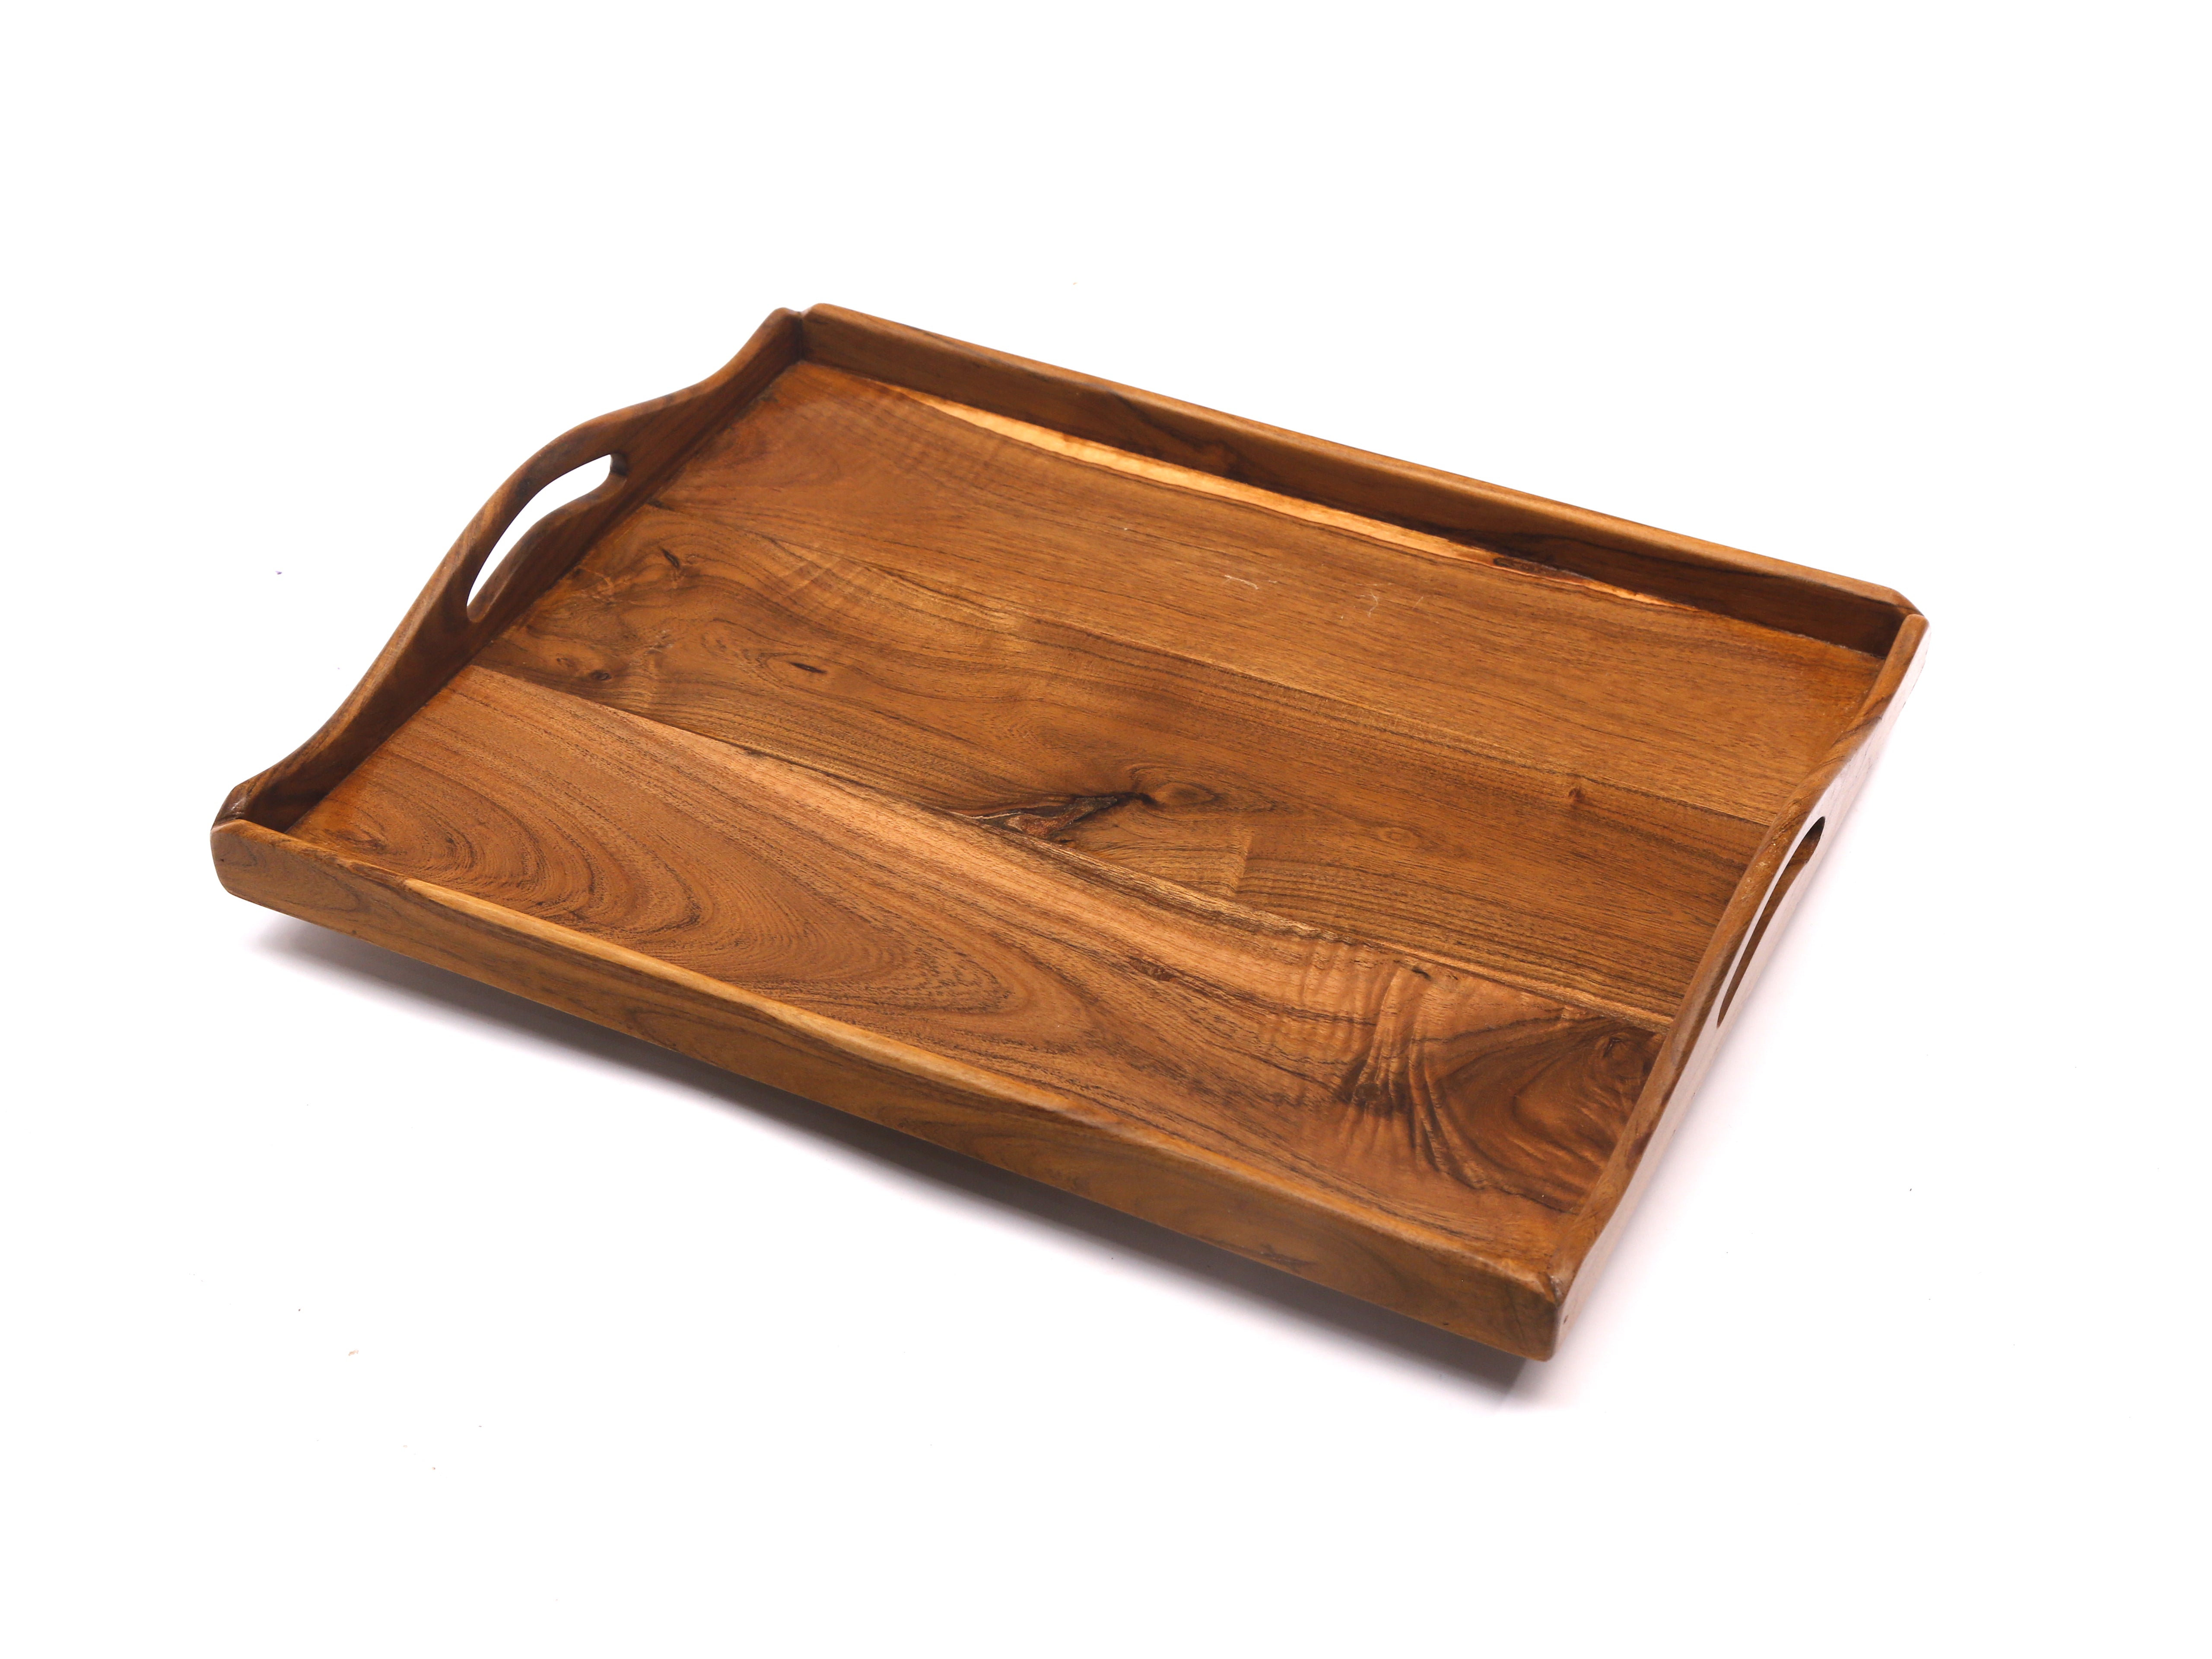 Wooden Crafted Tray Set Tray